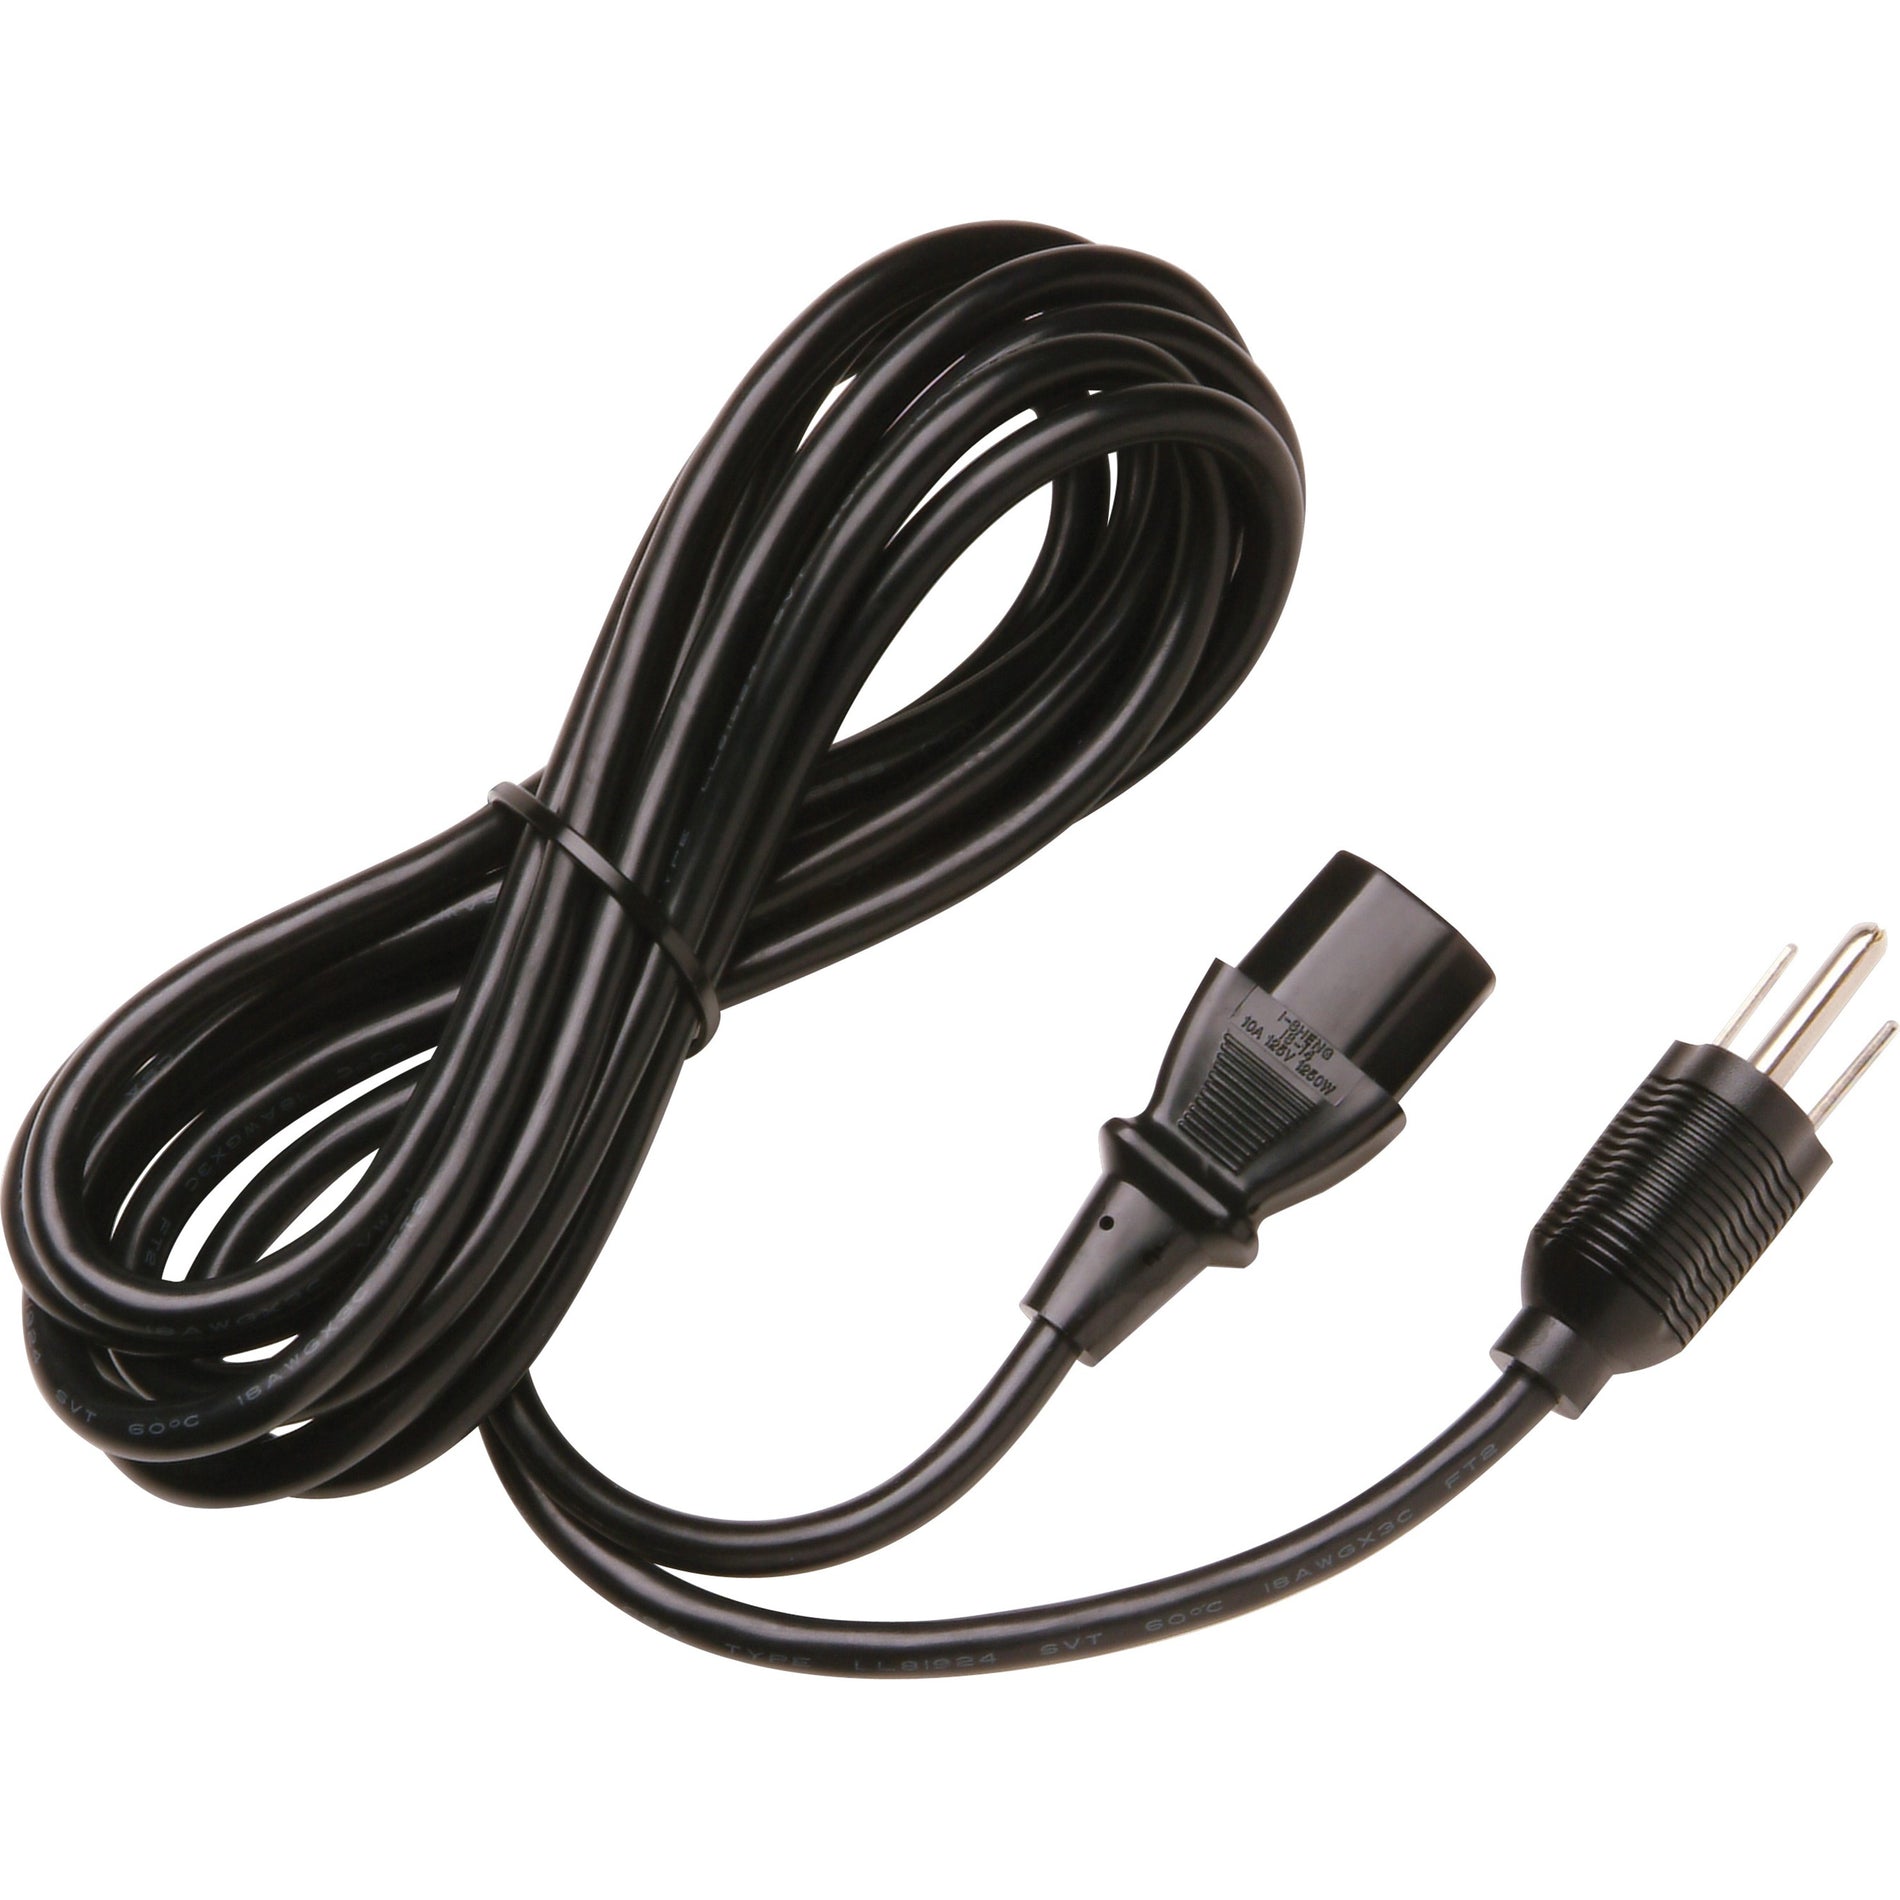 HPE AF593A Standard Power Cord, 11.81ft, Compatible with ProLiant DL585 G2/G5 Servers